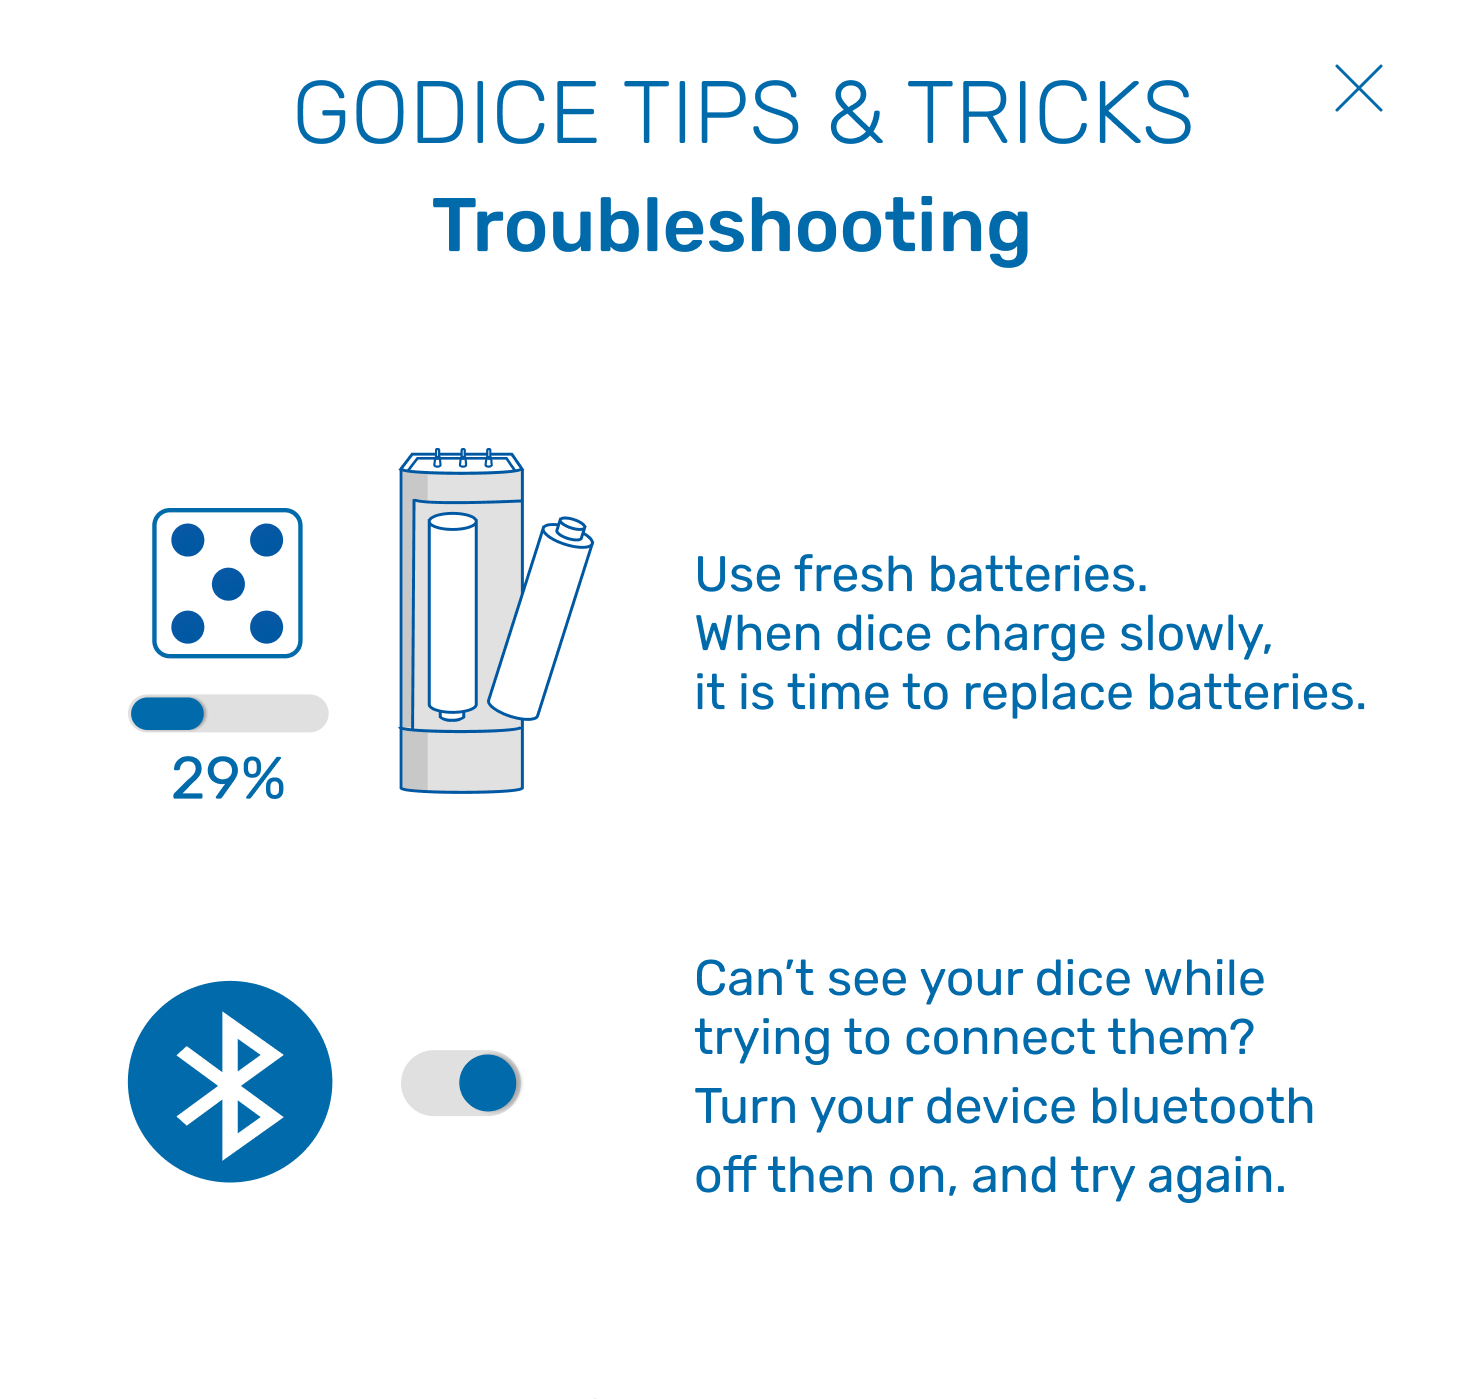 Tips_and_Tricks_04.png